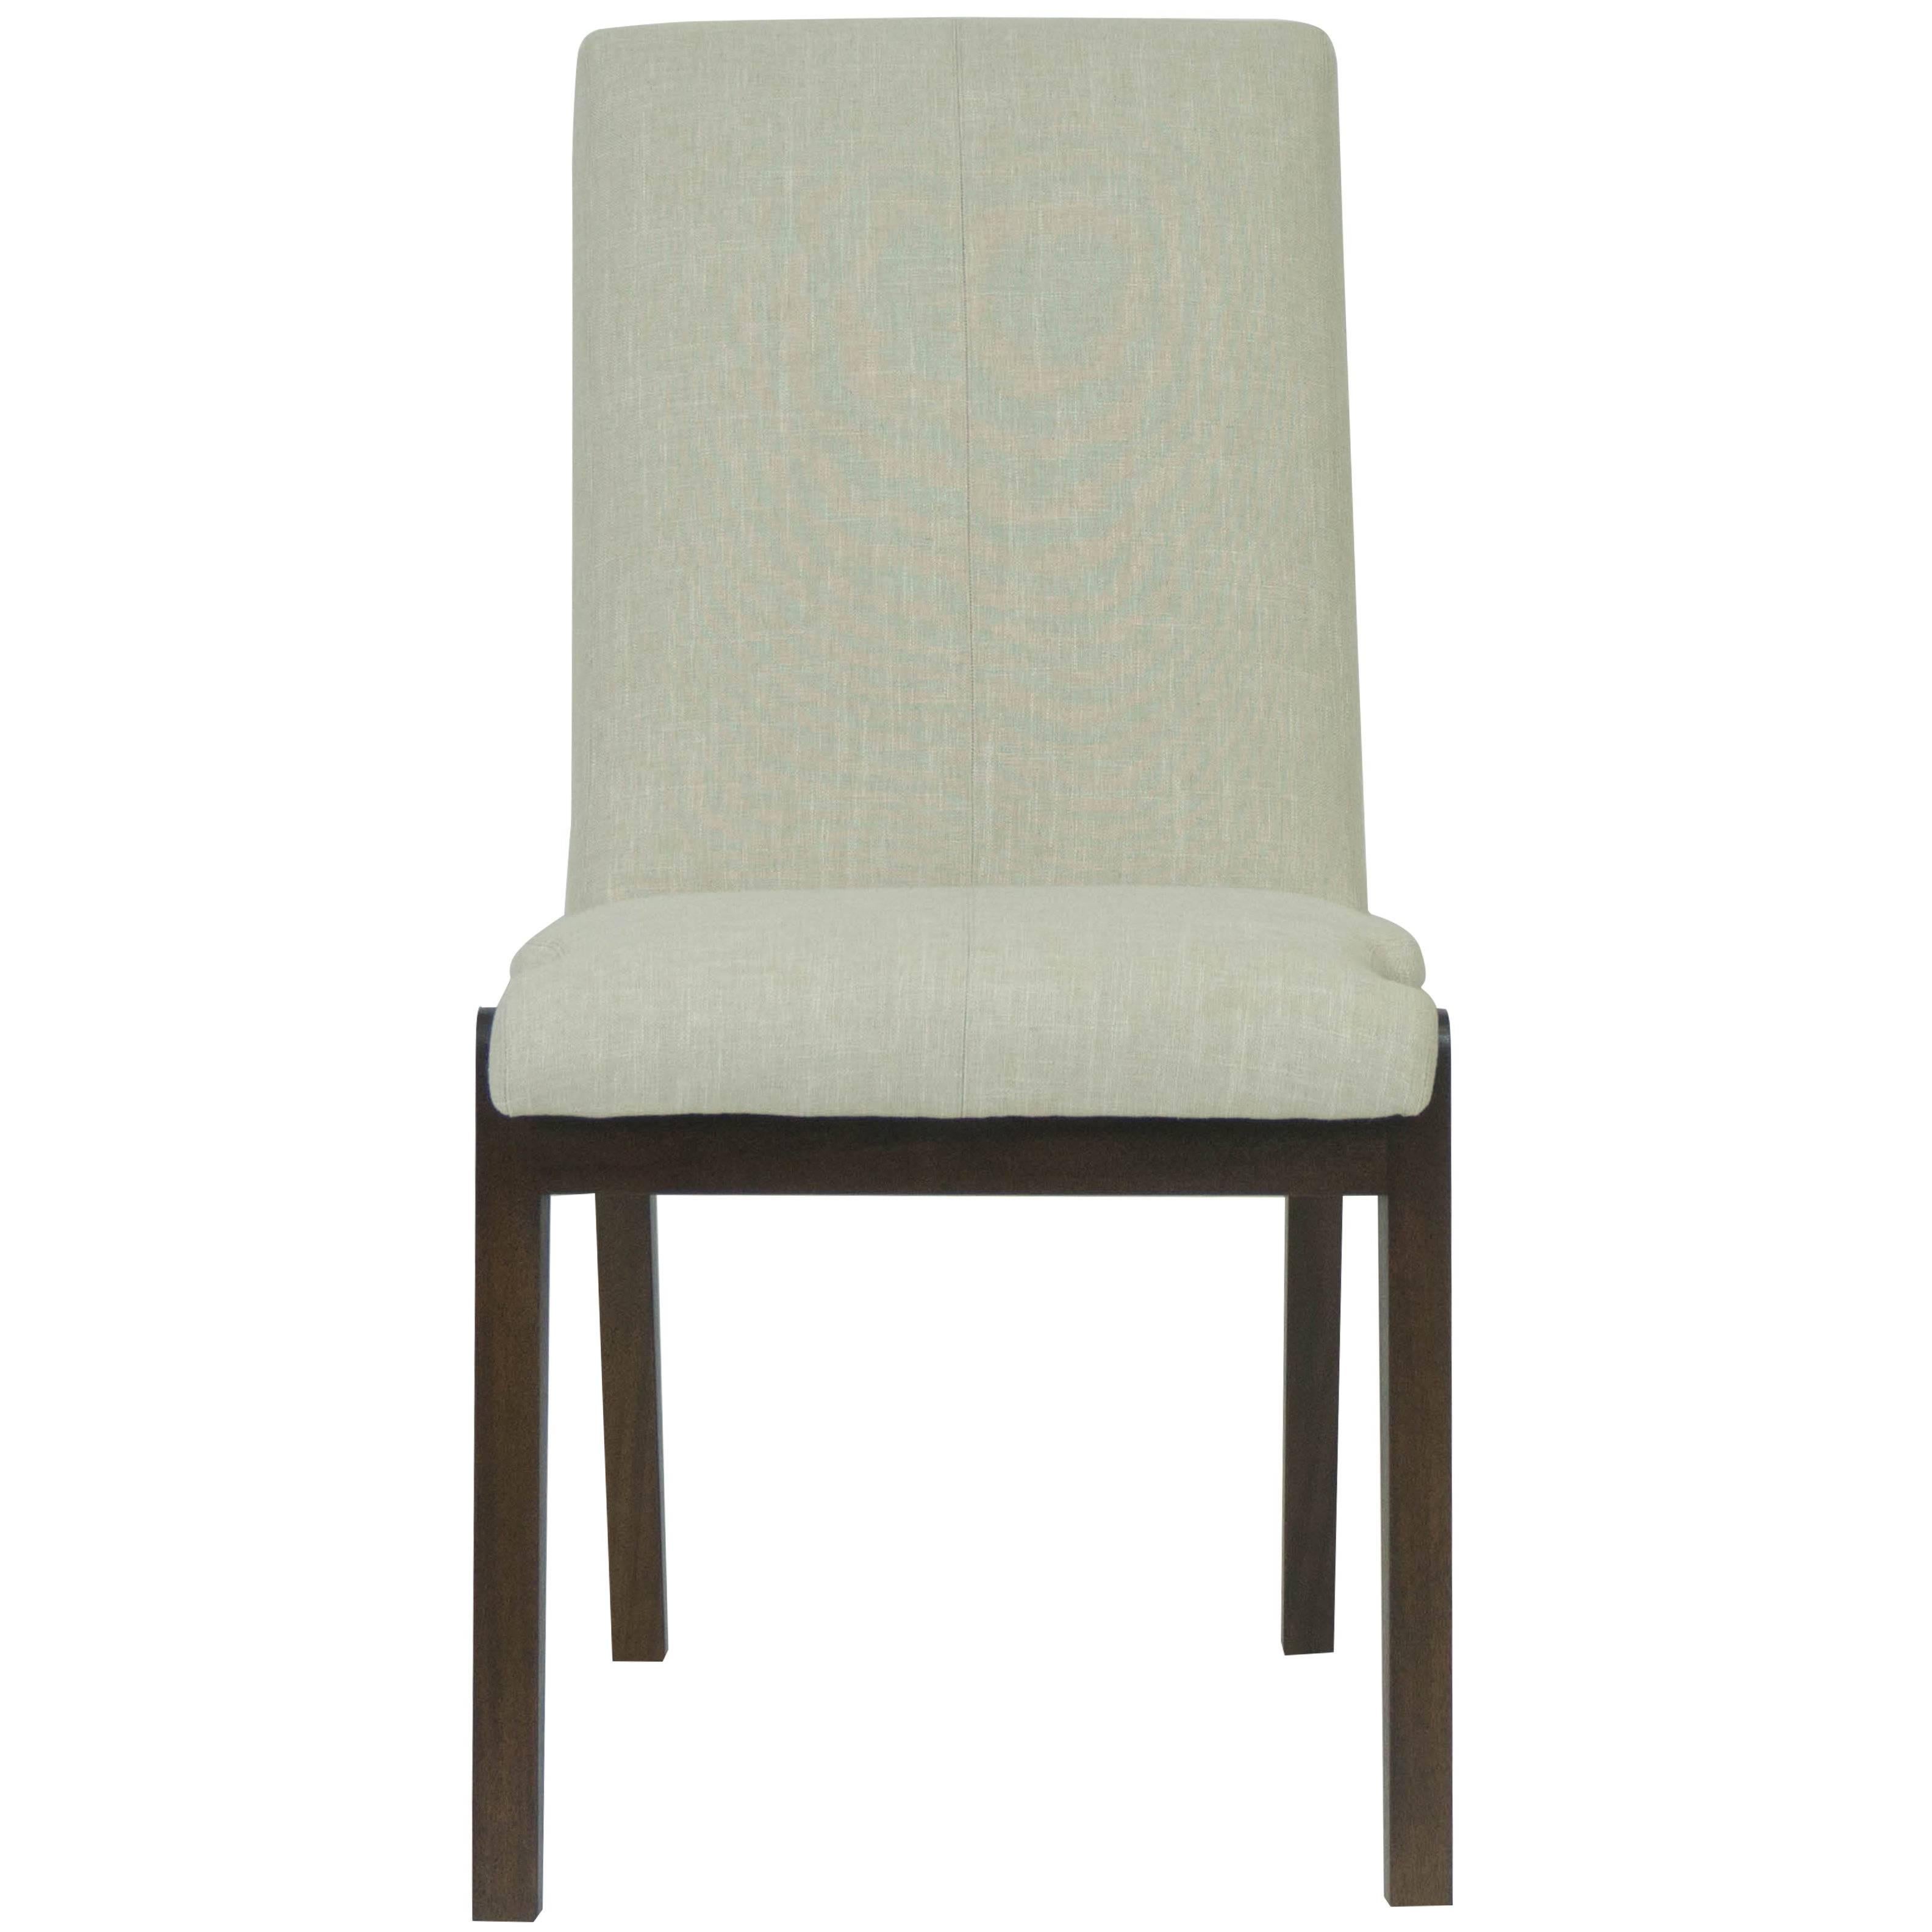 Tall Casual Upholstered Dining Chair For Sale